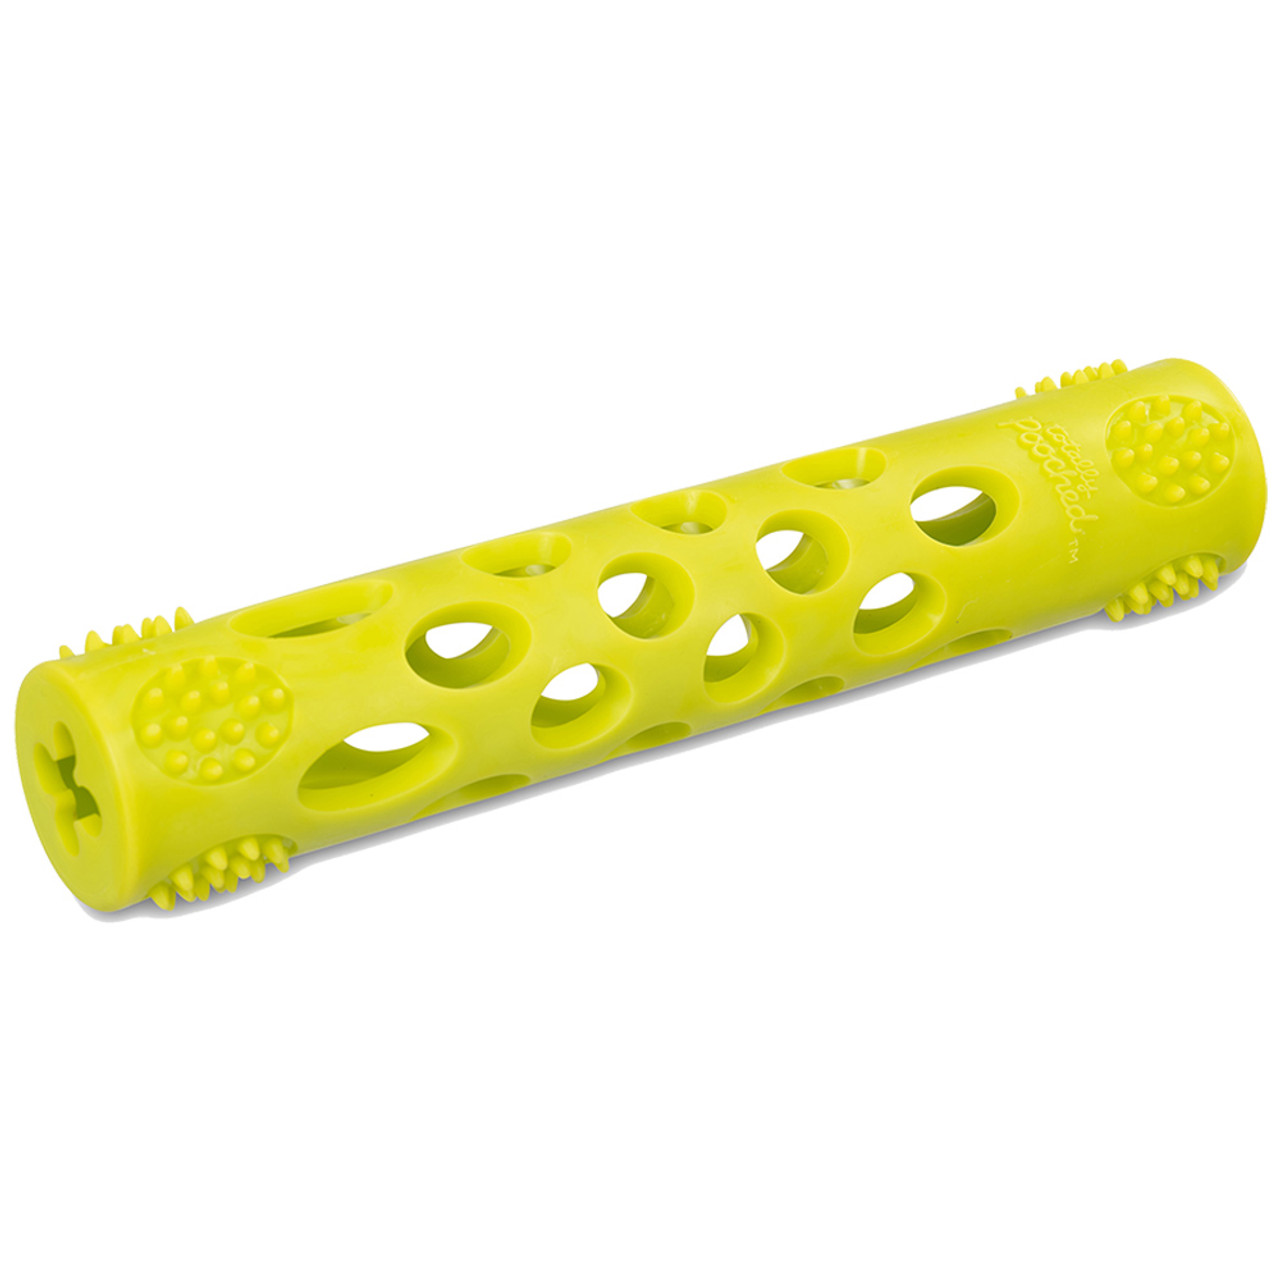 Totally Pooched Huff'n Puff Stick Dog Toy - Front, Green